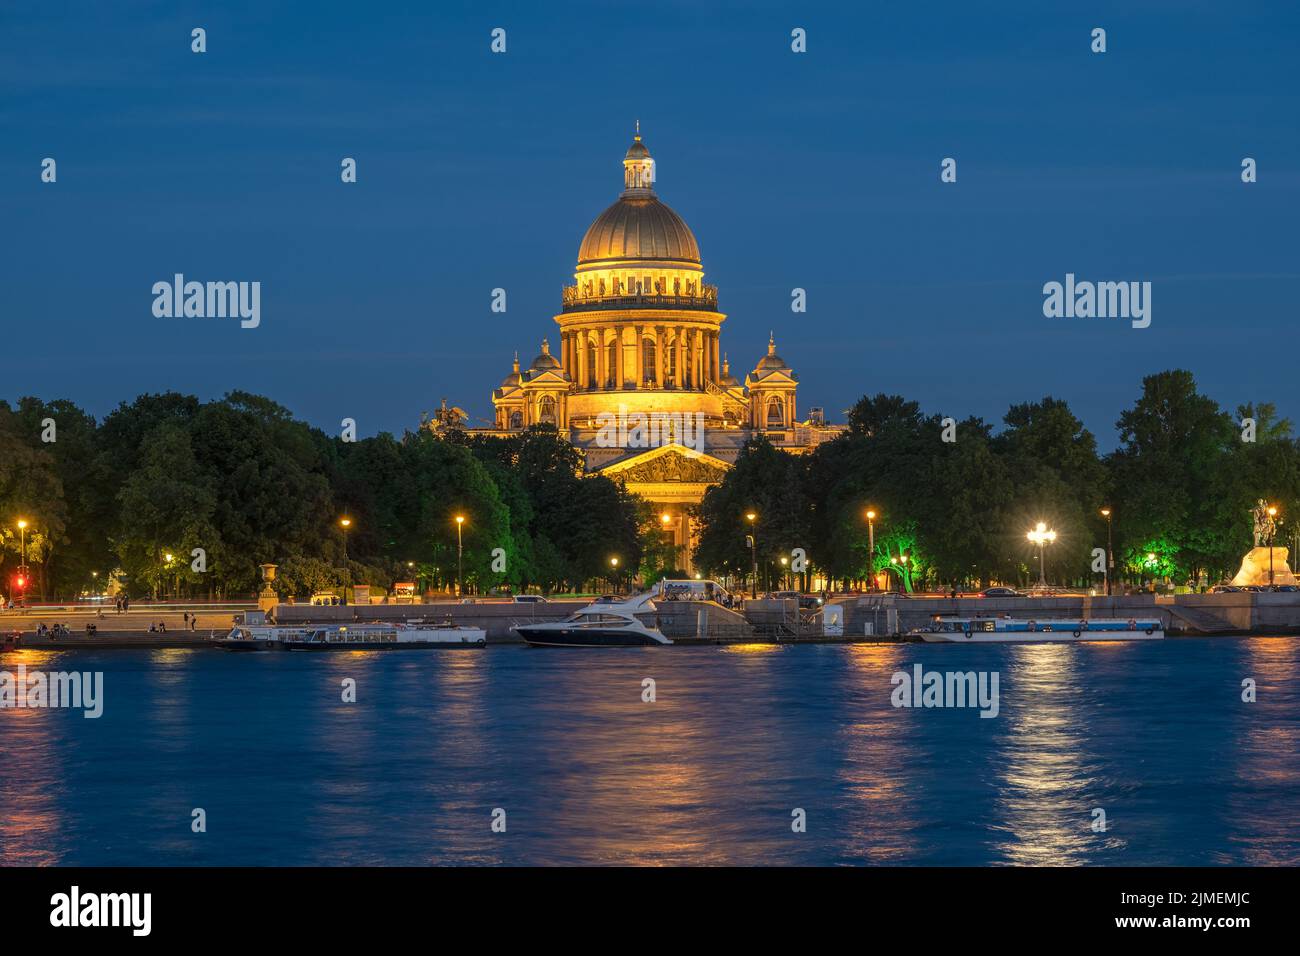 St. Isaac's Cathedral at night Stock Photo